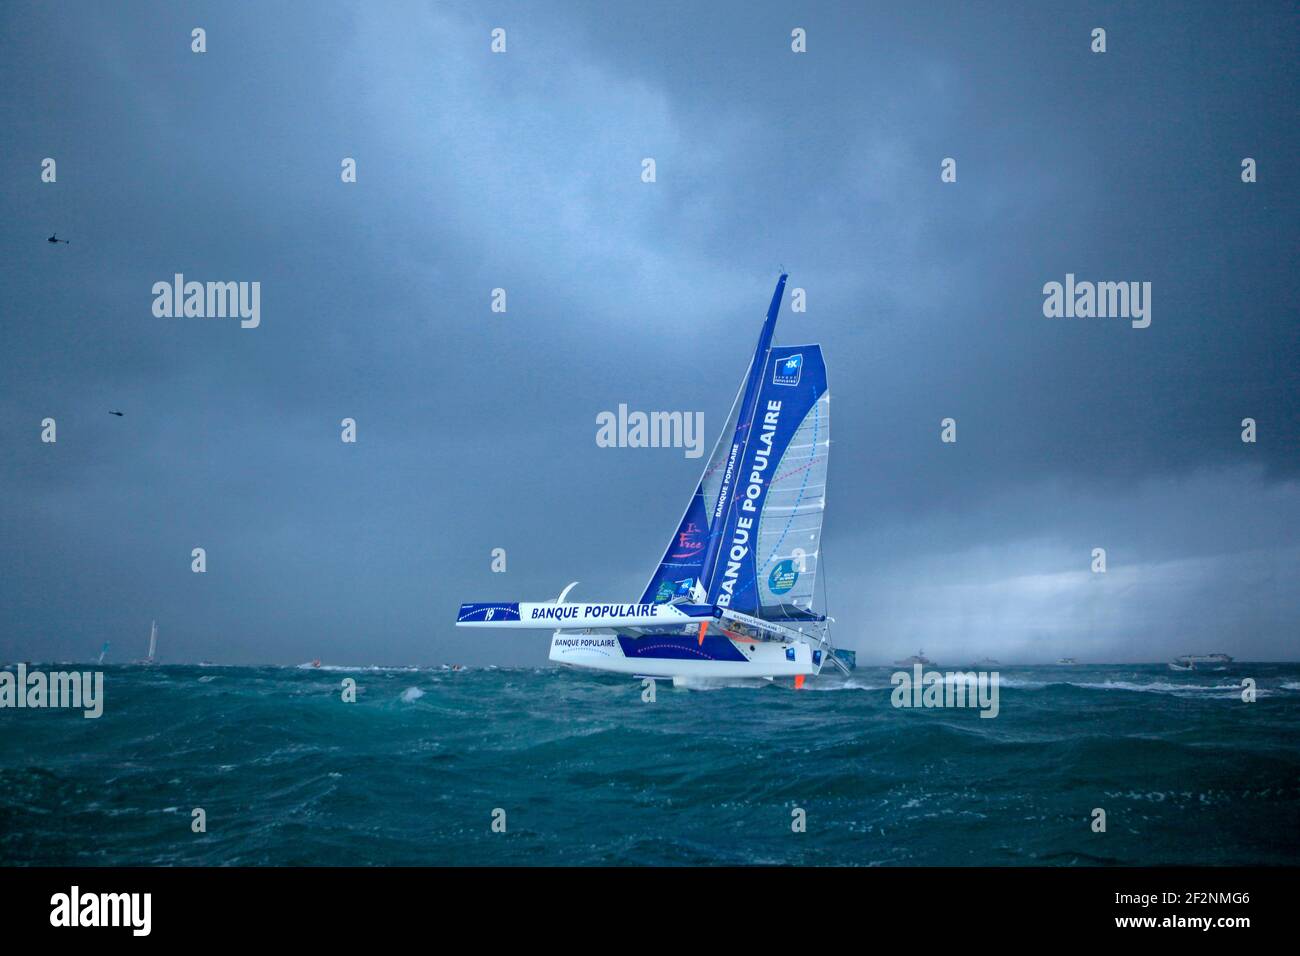 Start of the Route du Rhum, Loick Peyron and the Maxi Trimaran Solo Banque  Populaire VII on November 2, 2014 in Saint Malo, France - Photo Christophe  Launay / DPPI Stock Photo - Alamy